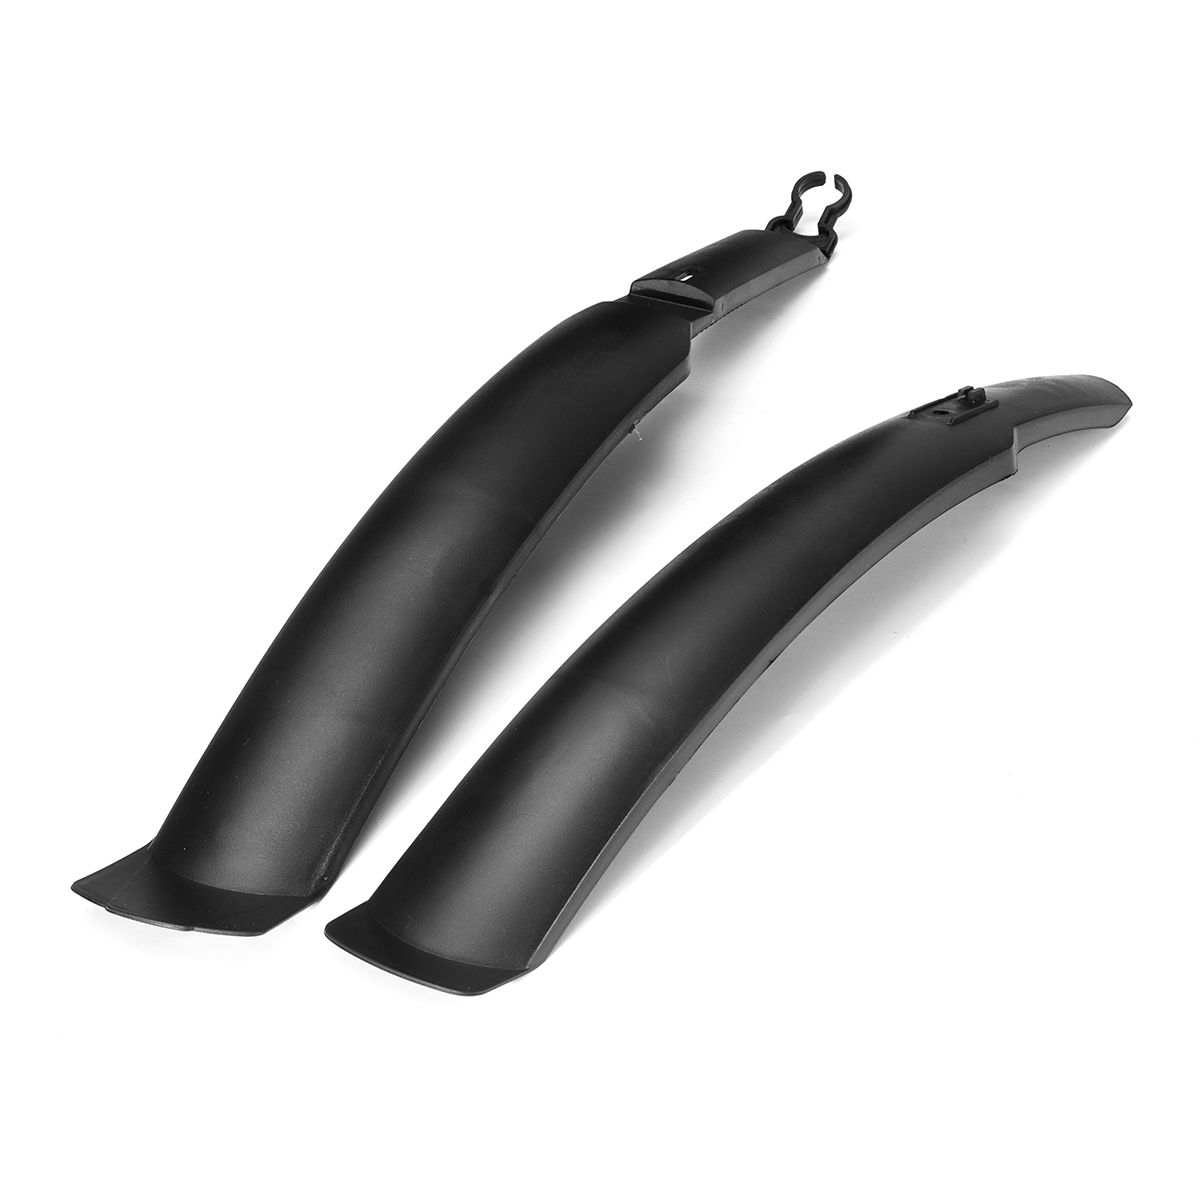 Bike-Bicycle-Mudguards-Fenders-26-Front-Rear-Mud-Guard-Set-Quick-Release-Fender-1553564